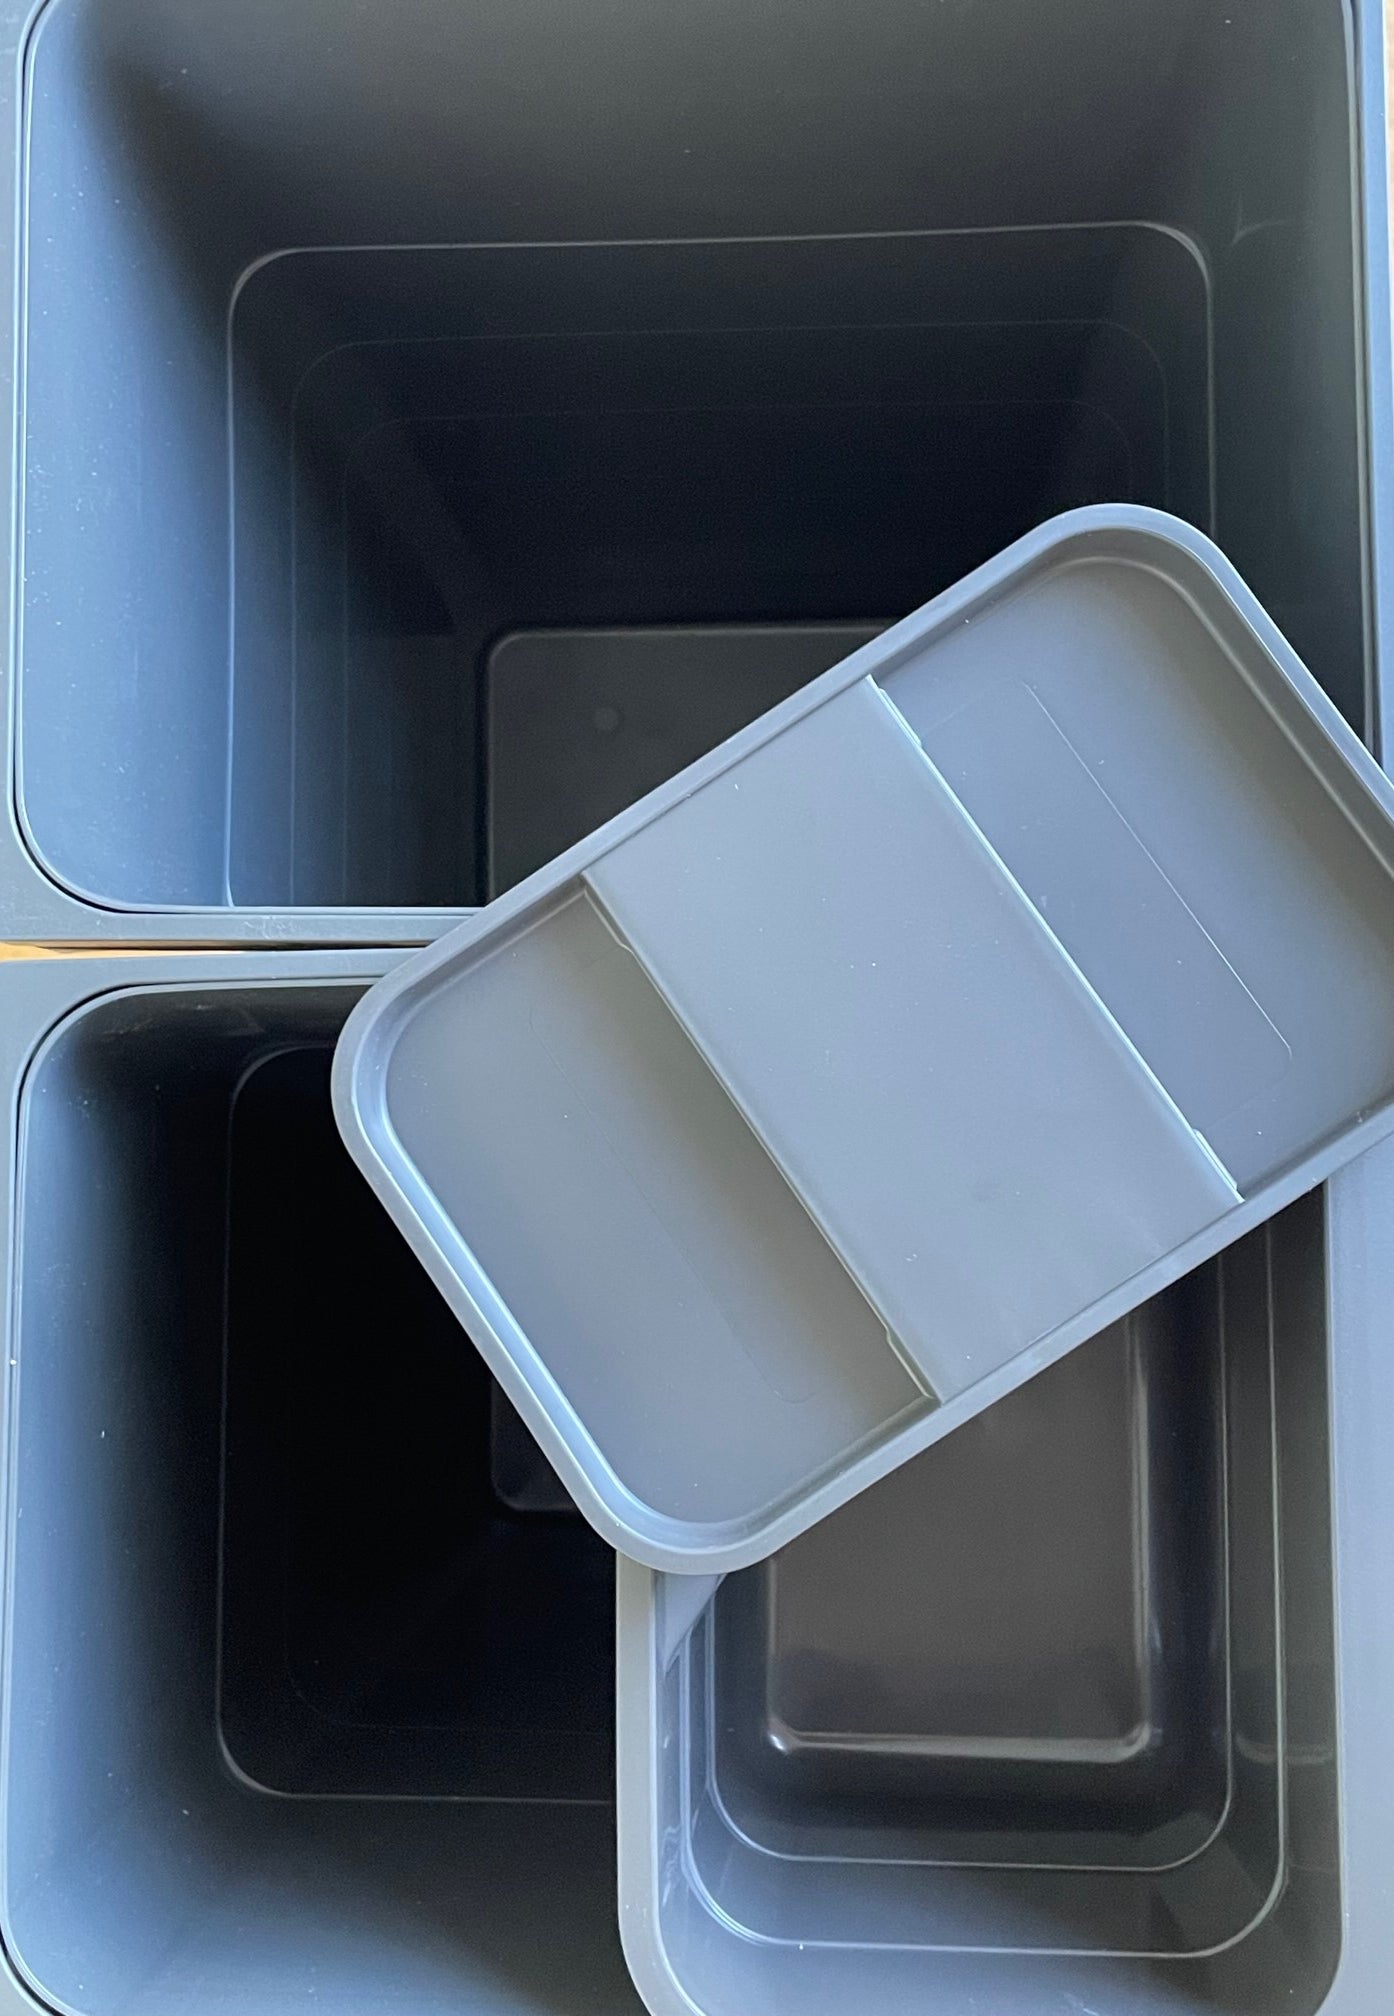 The food caddy has its own lid to minimise smells and odours